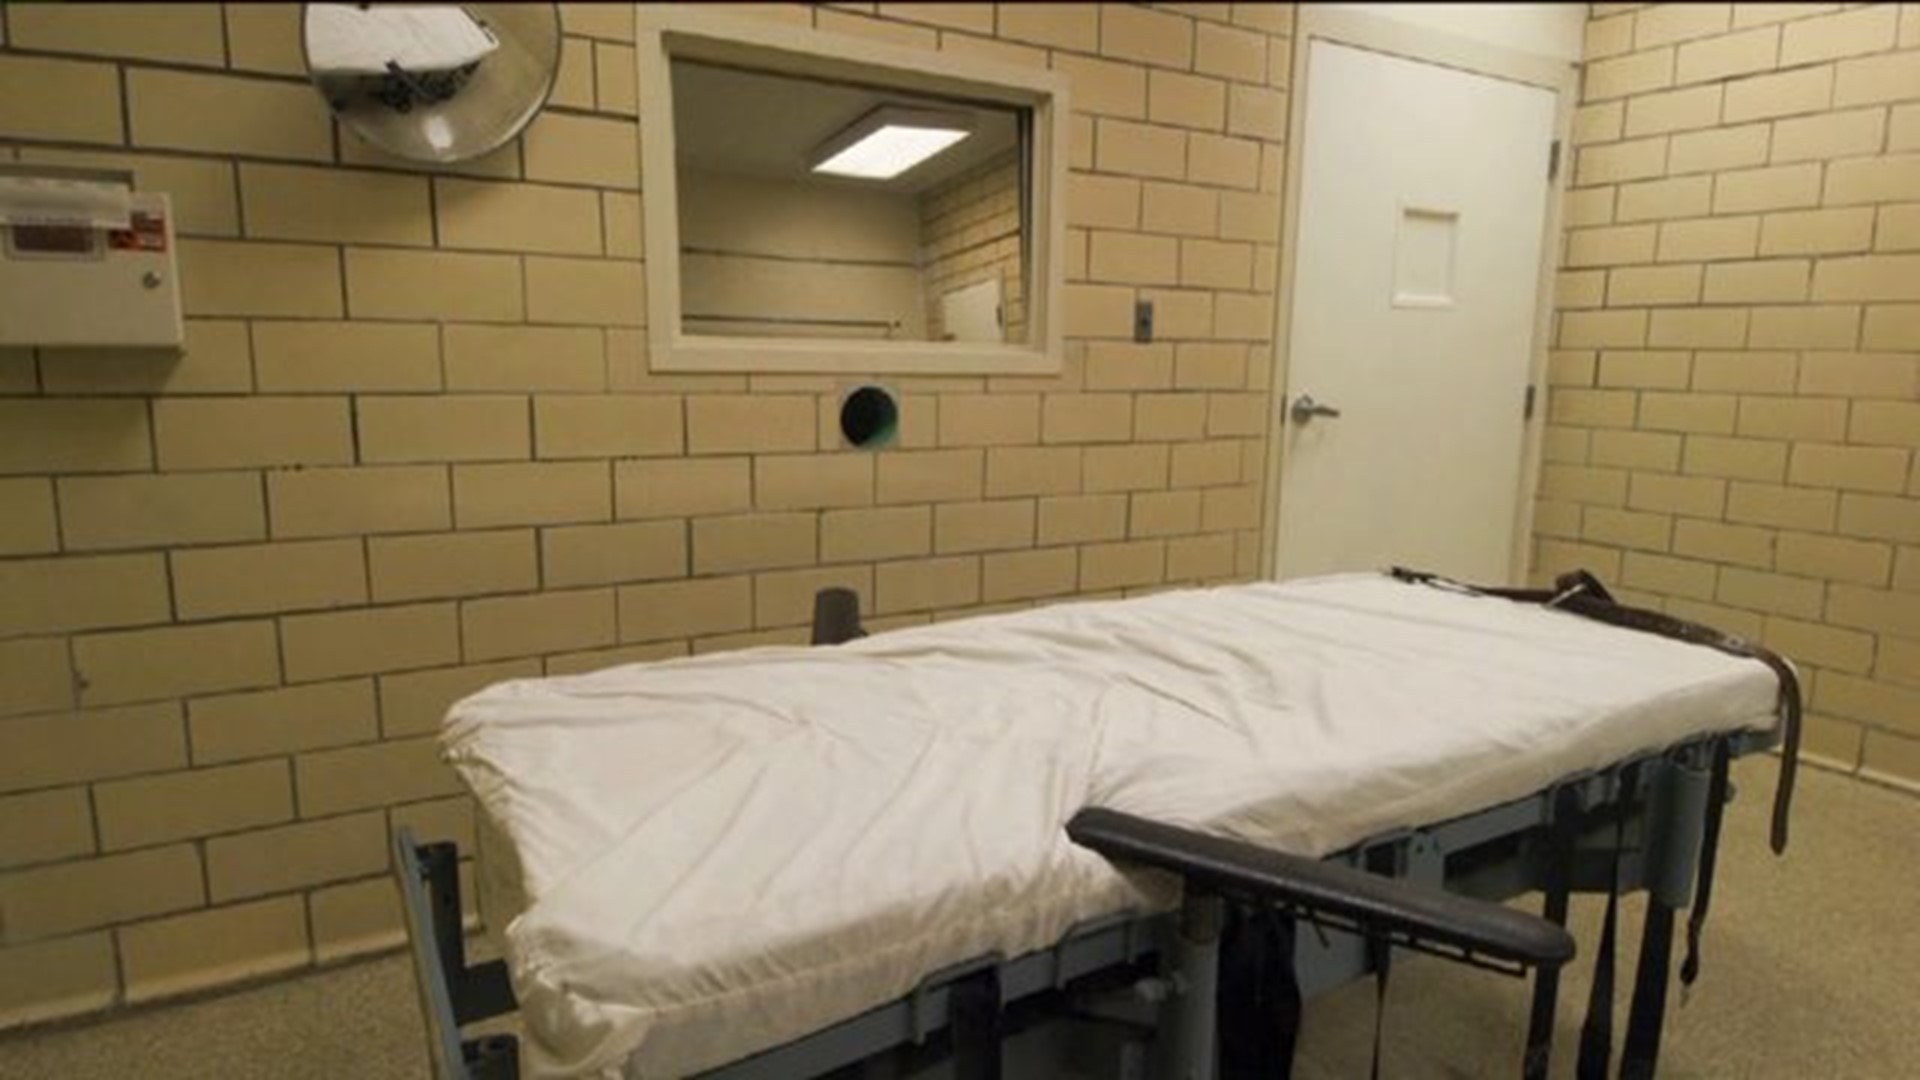 Death Row Delays: Victims` Families Frustrated with Slow Death Penalty Process